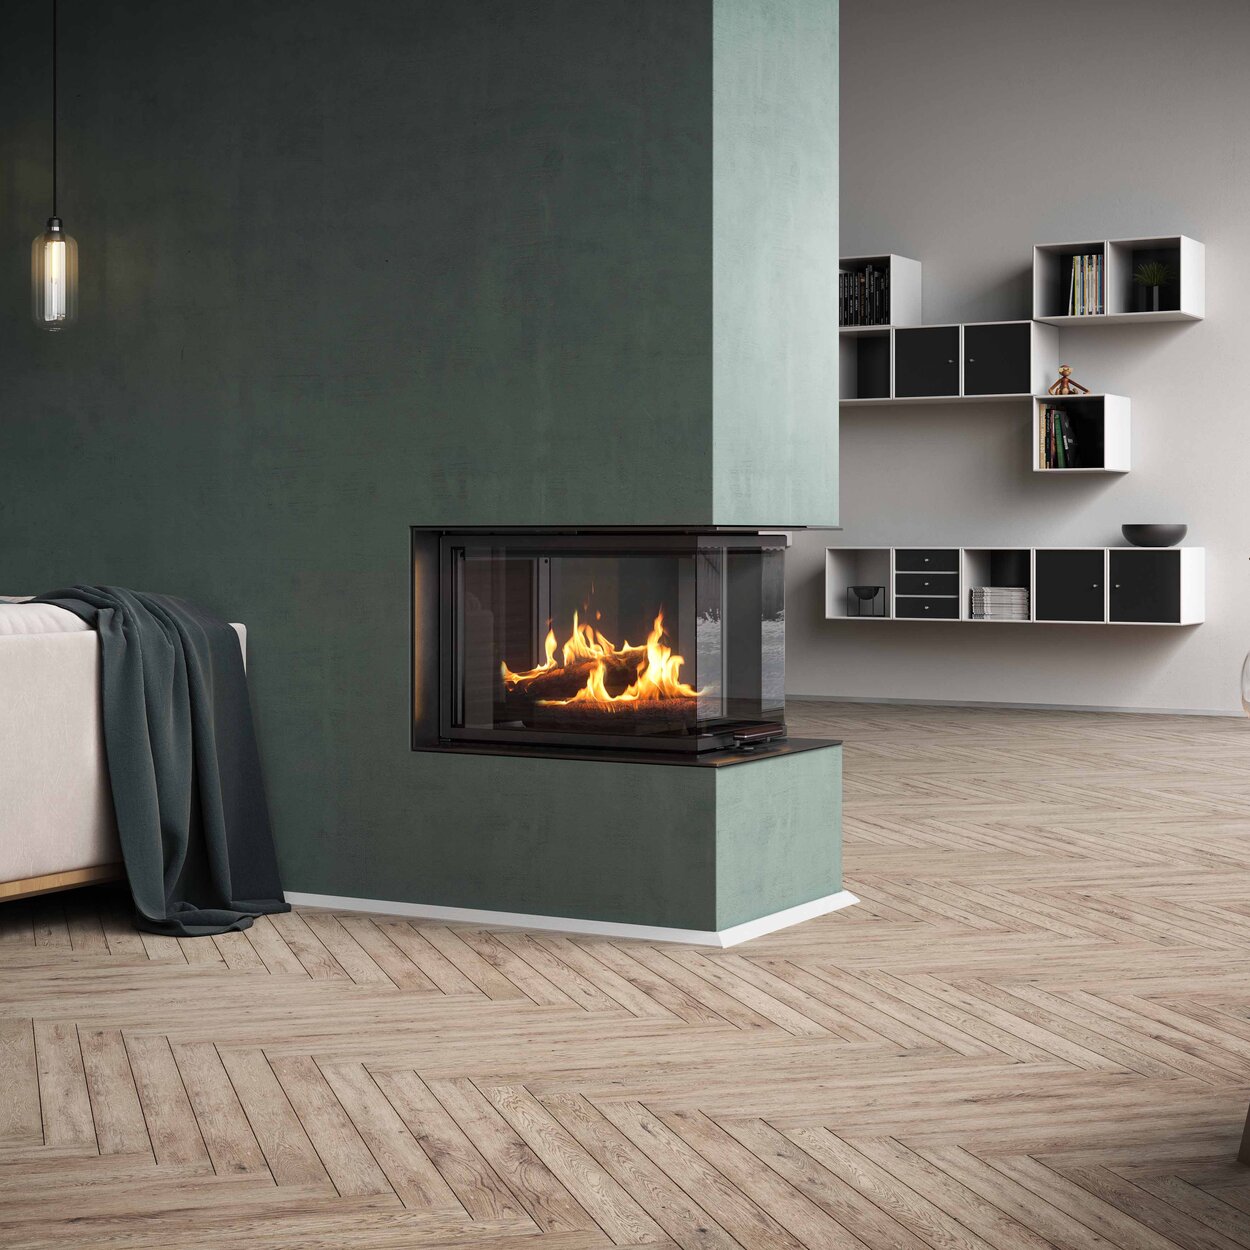 Wood fireplace VISIO 3:1 are integrated into a green wall as a room divider that structures the living space